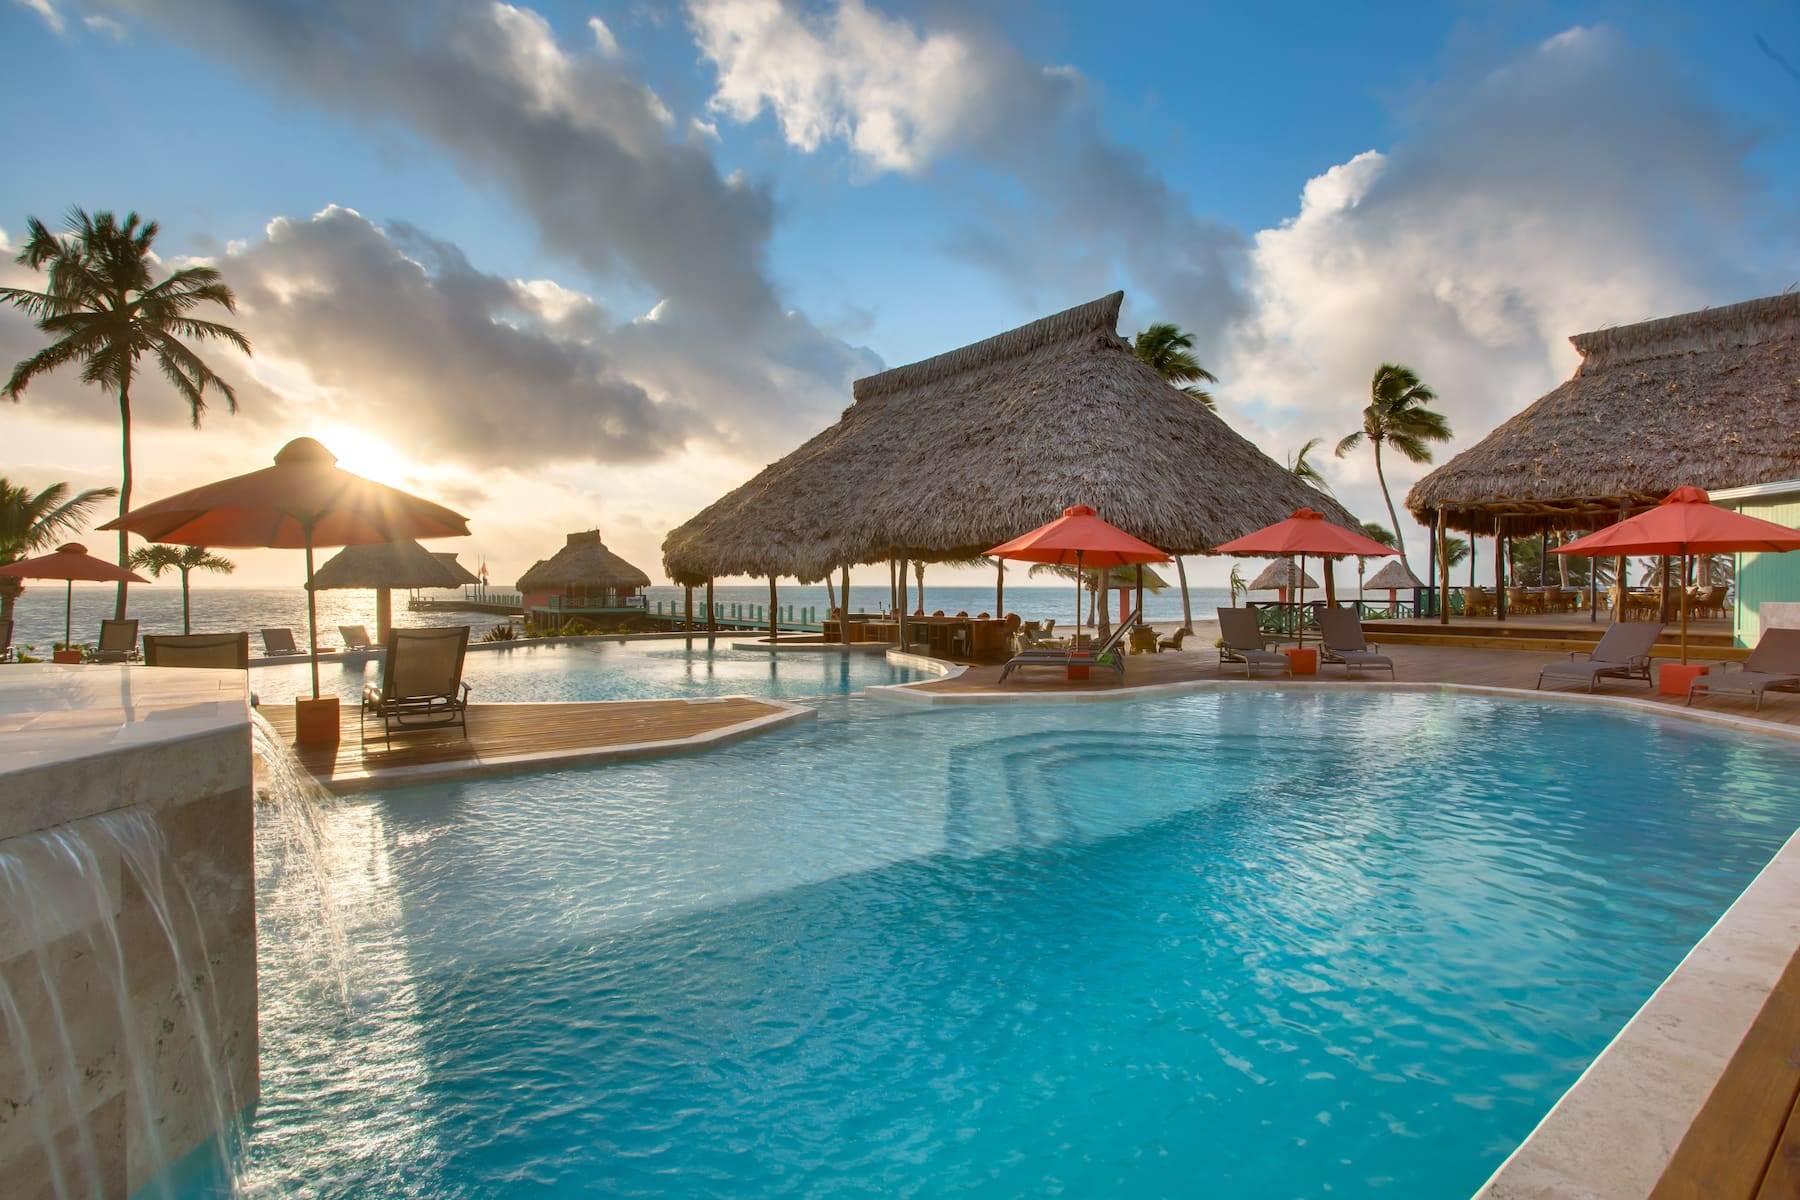 grass-thatched shelters sit between a hotel pool and the ocean; the sun sets in the background